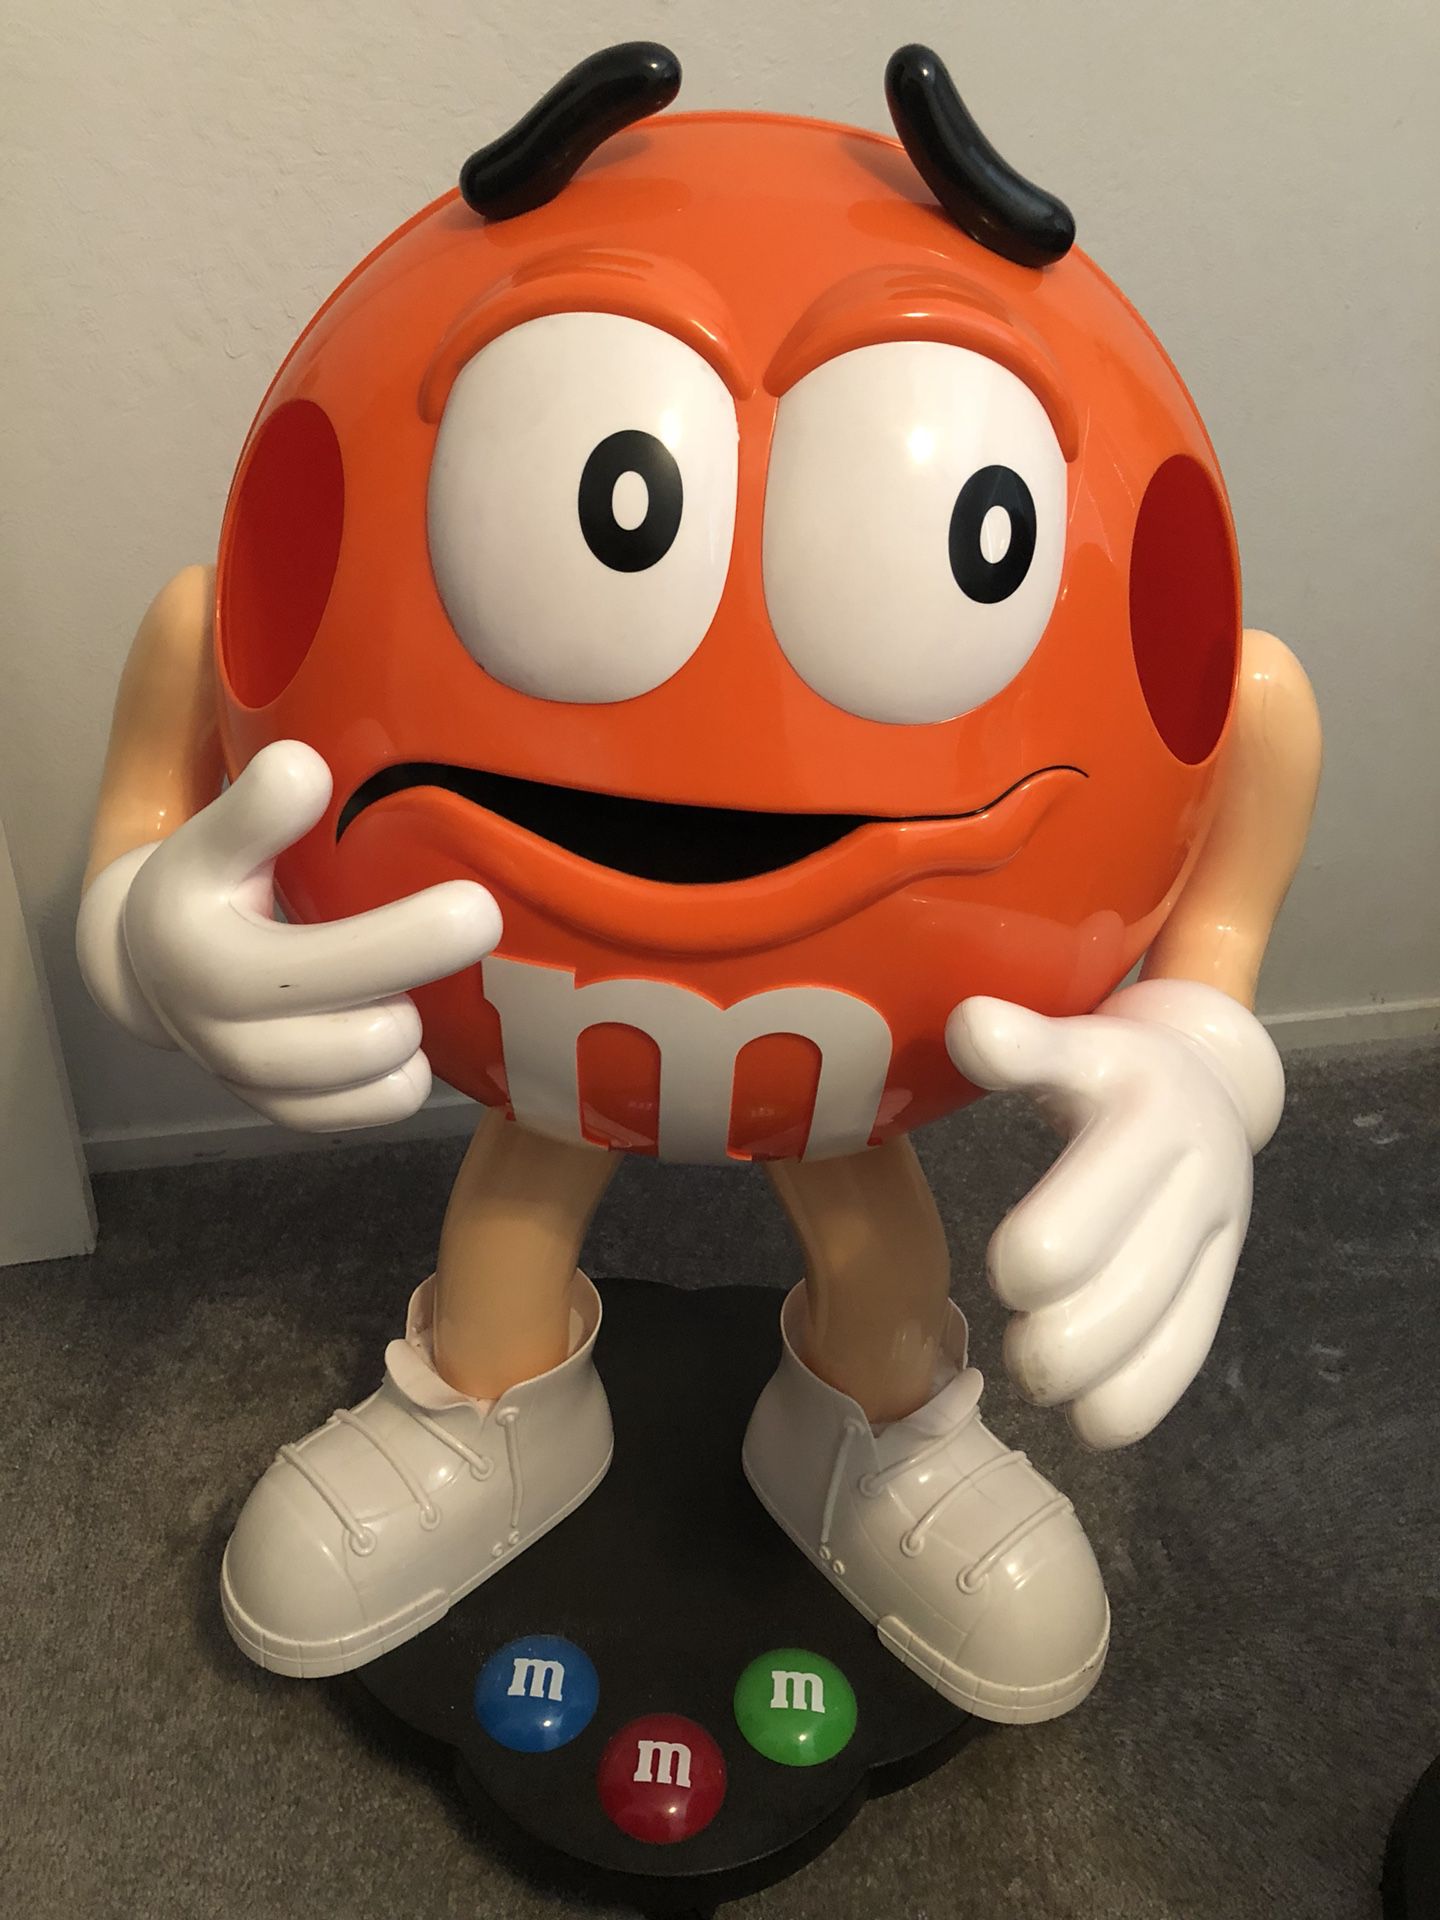 Giant Orange M&M display for Sale in Fremont, CA - OfferUp